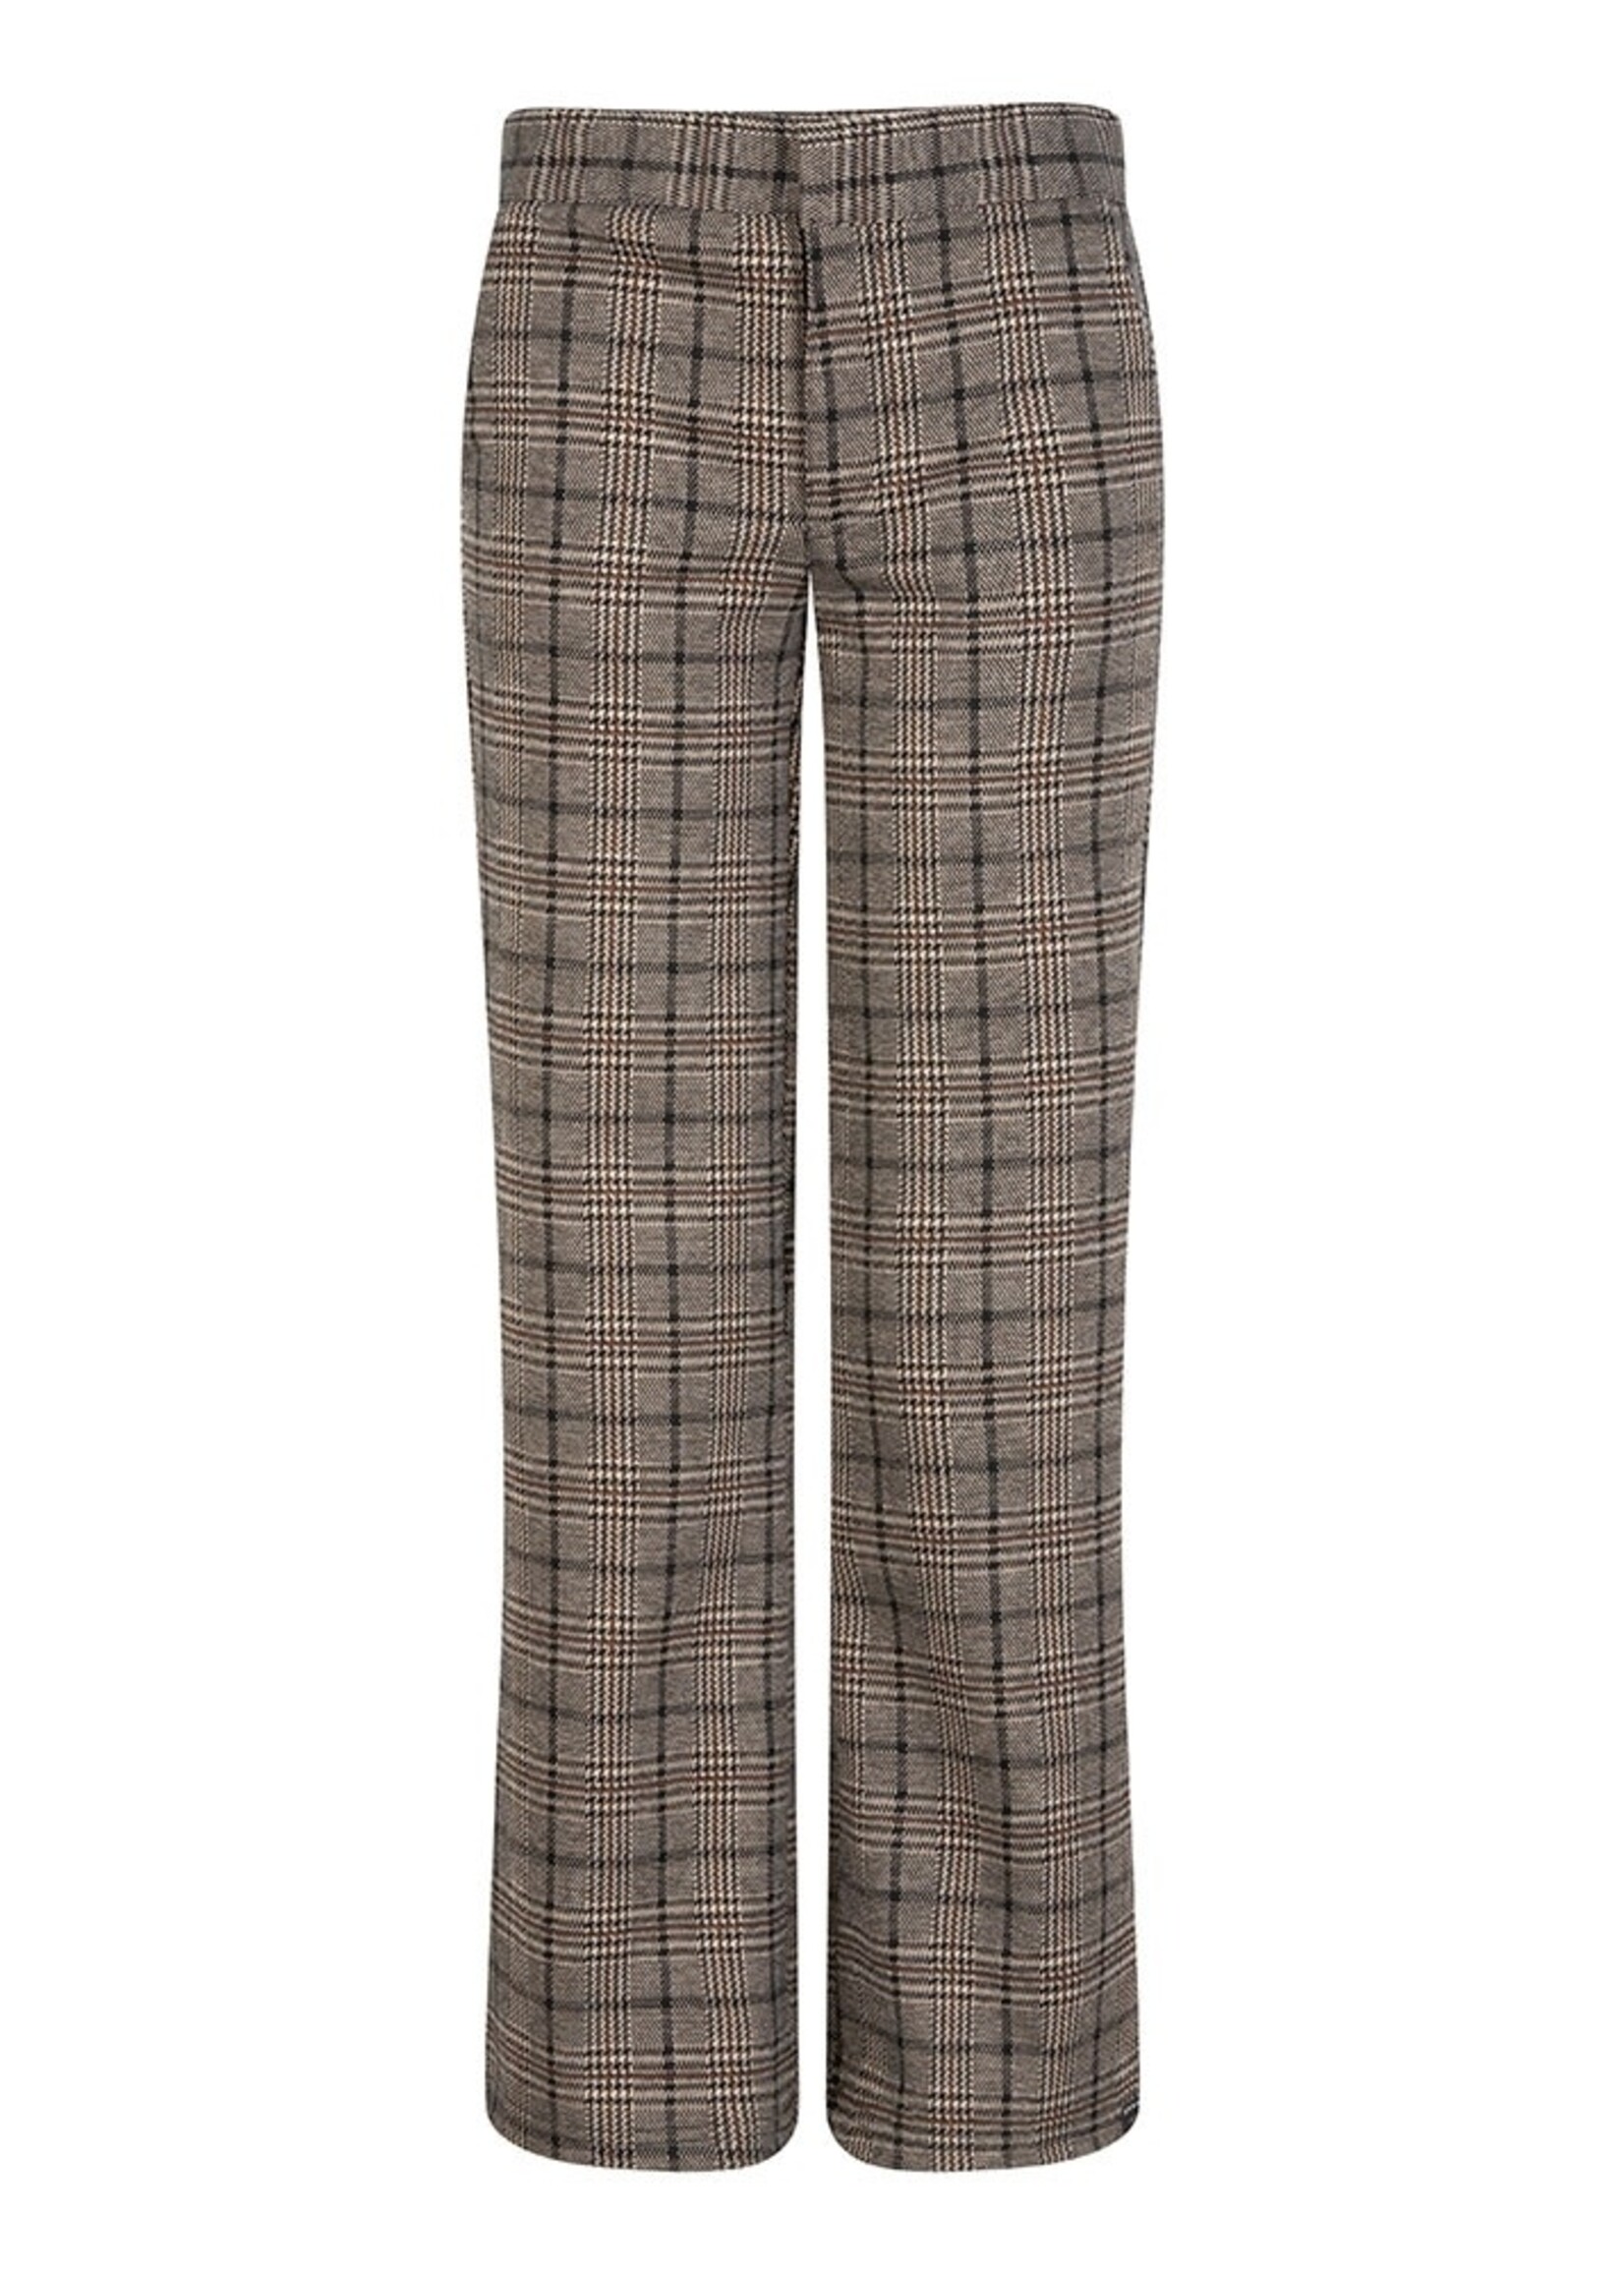 Wide check pants - Spice brown